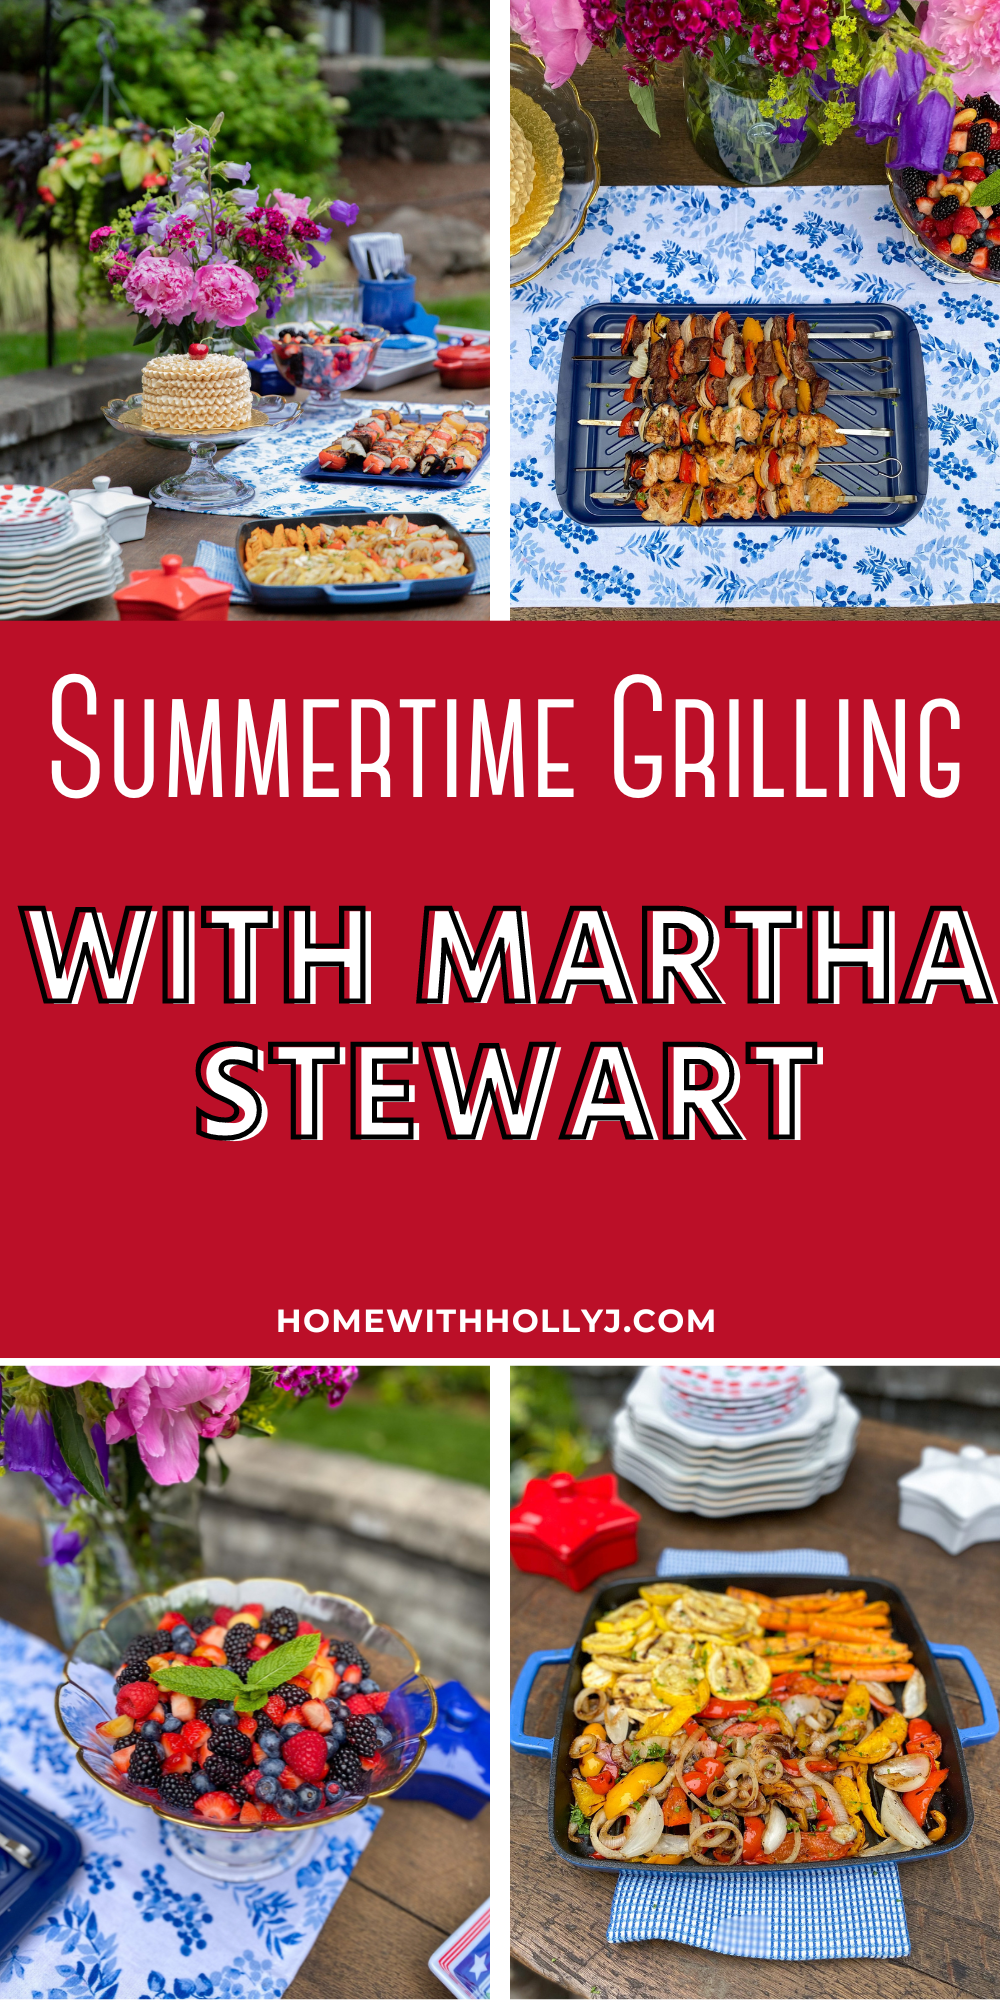 It's the perfect time for an outdoor summer BBQ and grilling with Martha Stewart. Learn my best tips on entertaining and hosting!